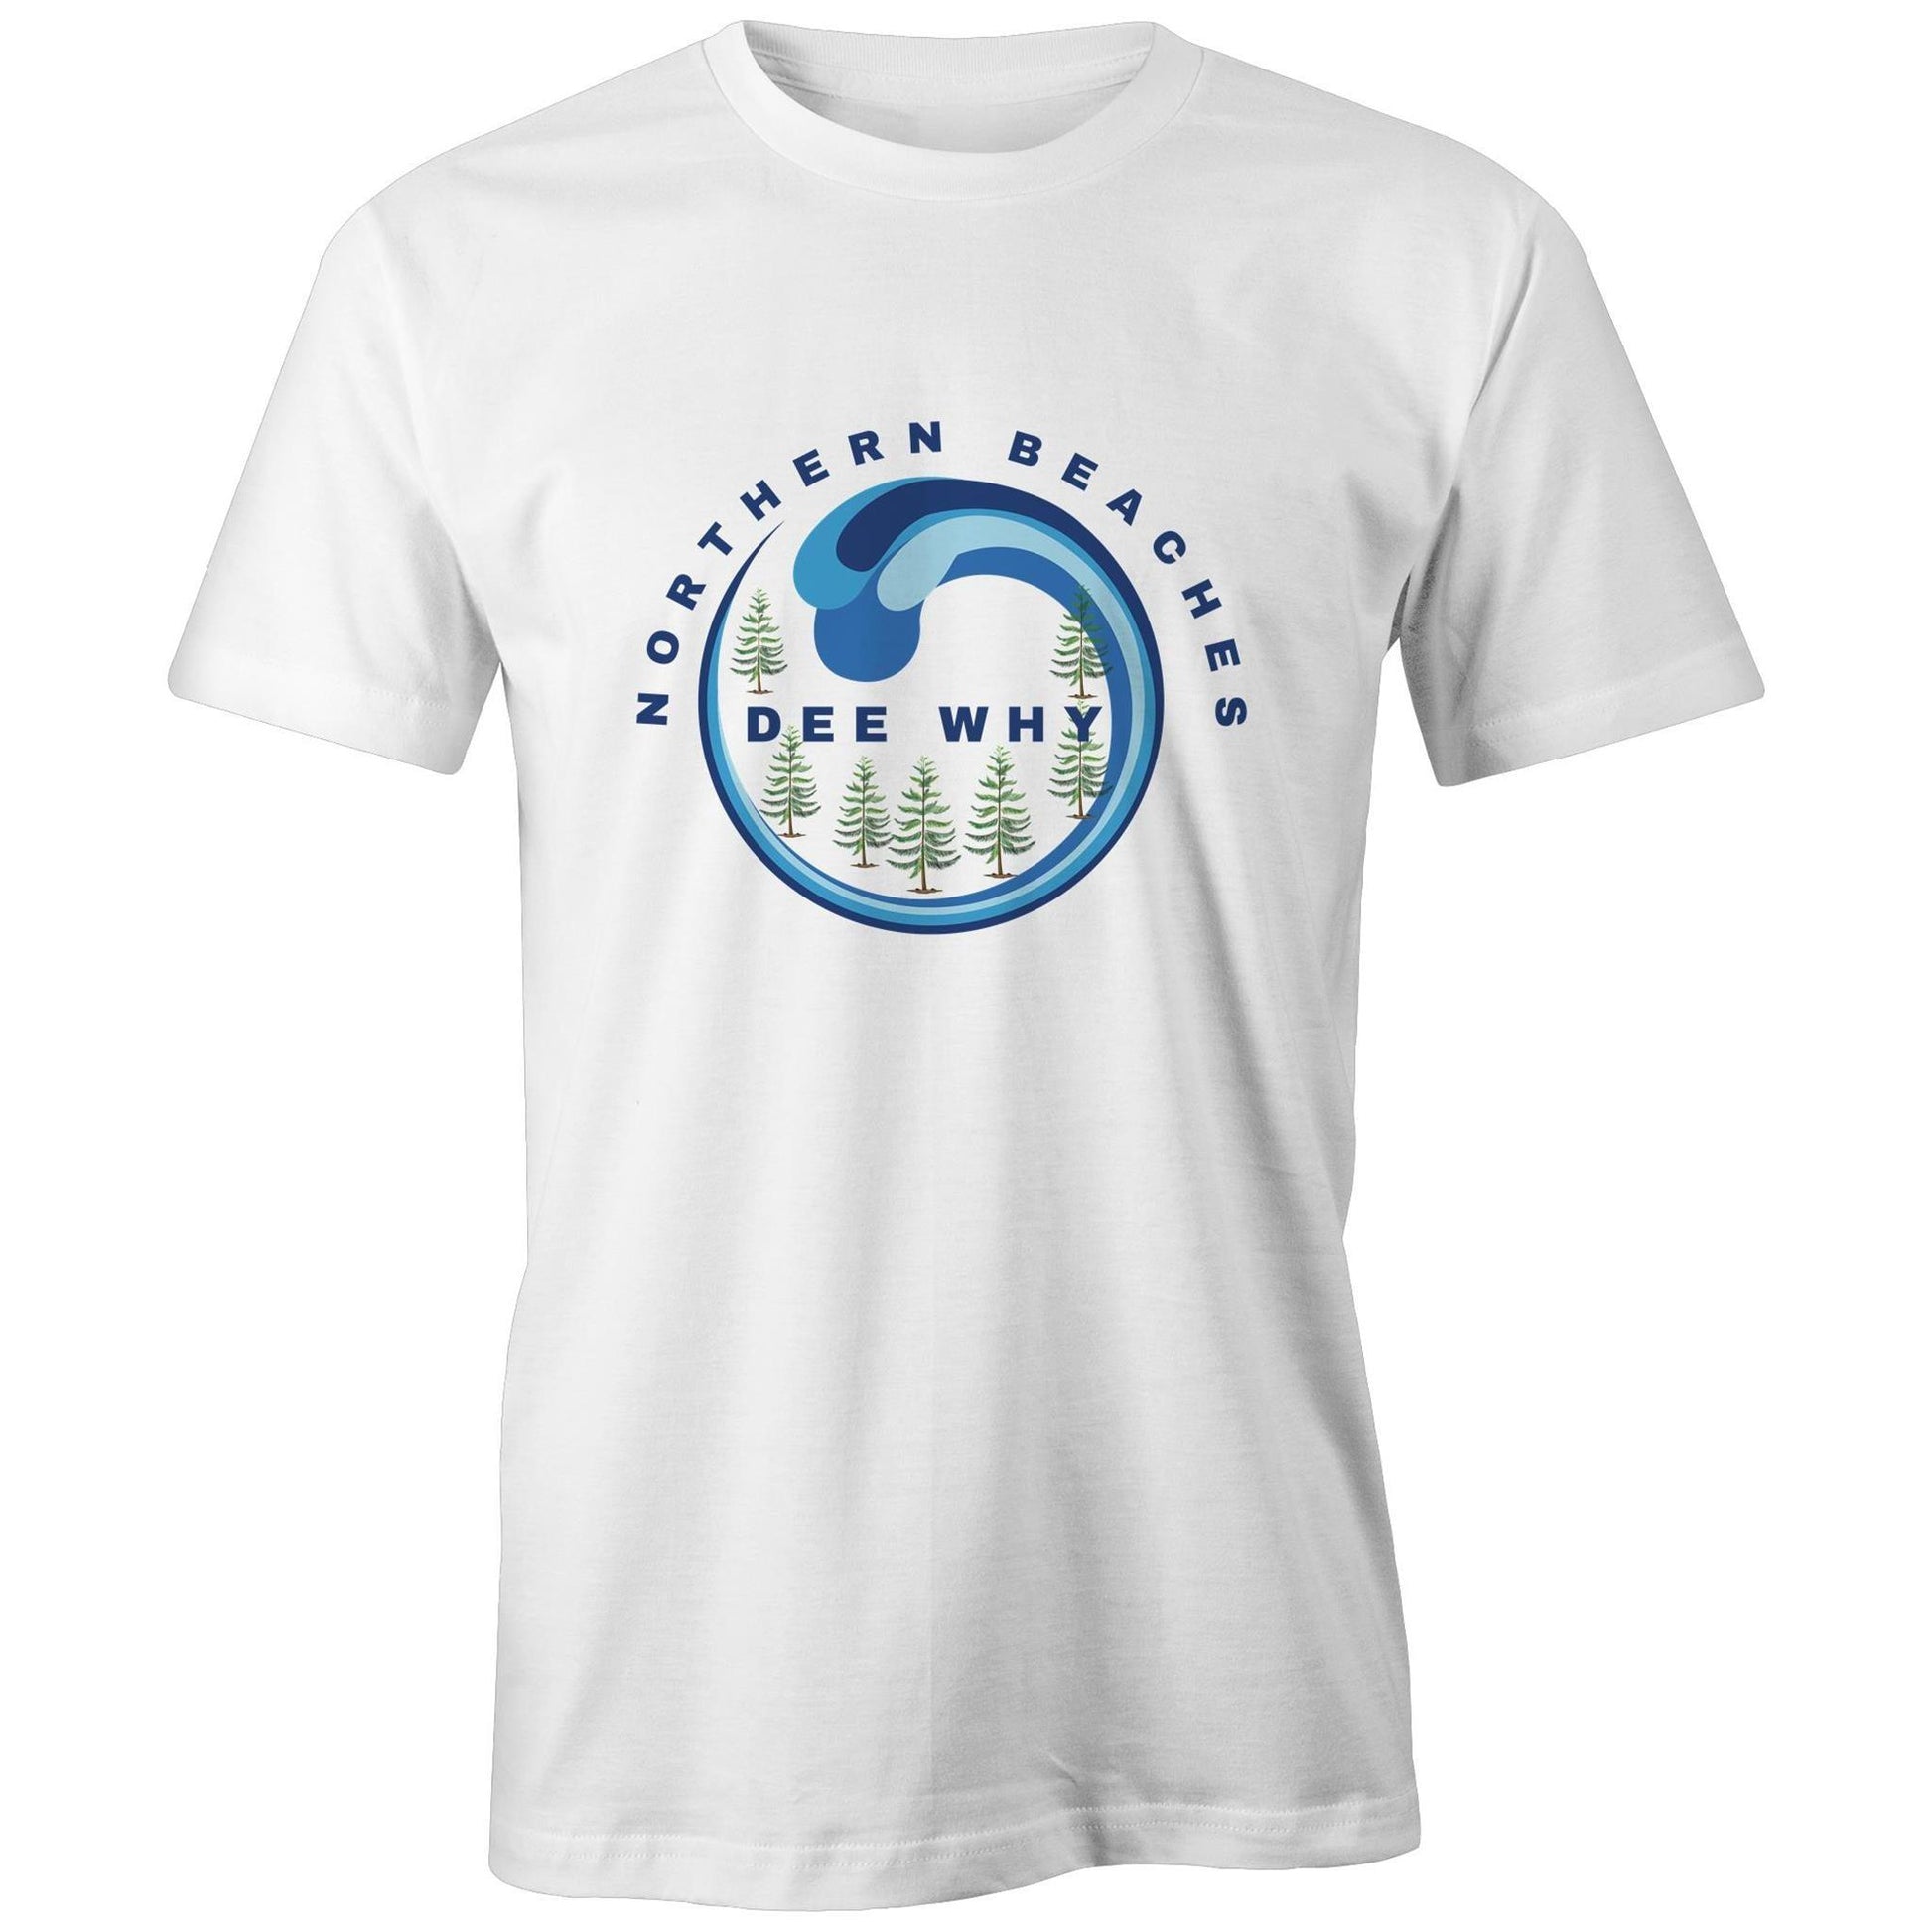 Classic cotton Tee Northern Beaches logo design - Lost Manly Shop